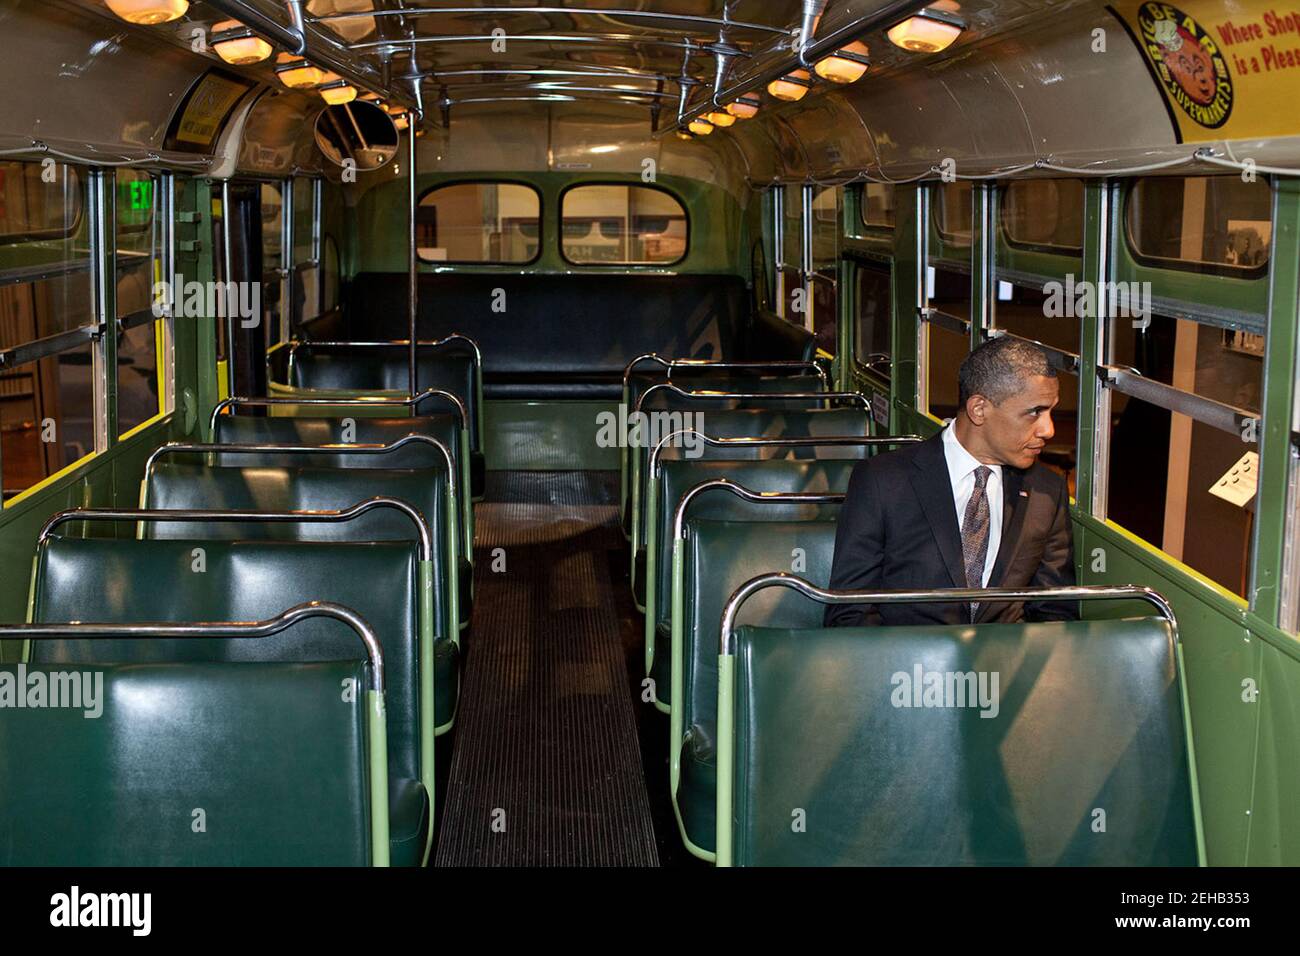 April 18, 2012 We were doing an event at the Henry Ford Museum in Dearborn, Mich. Before speaking, the President was looking at some of the automobiles and exhibits adjacent to the event, and before I knew what was happening he walked onto the famed Rosa Parks bus. He sat in one of the seats, looking out the window for only a few seconds. Stock Photo